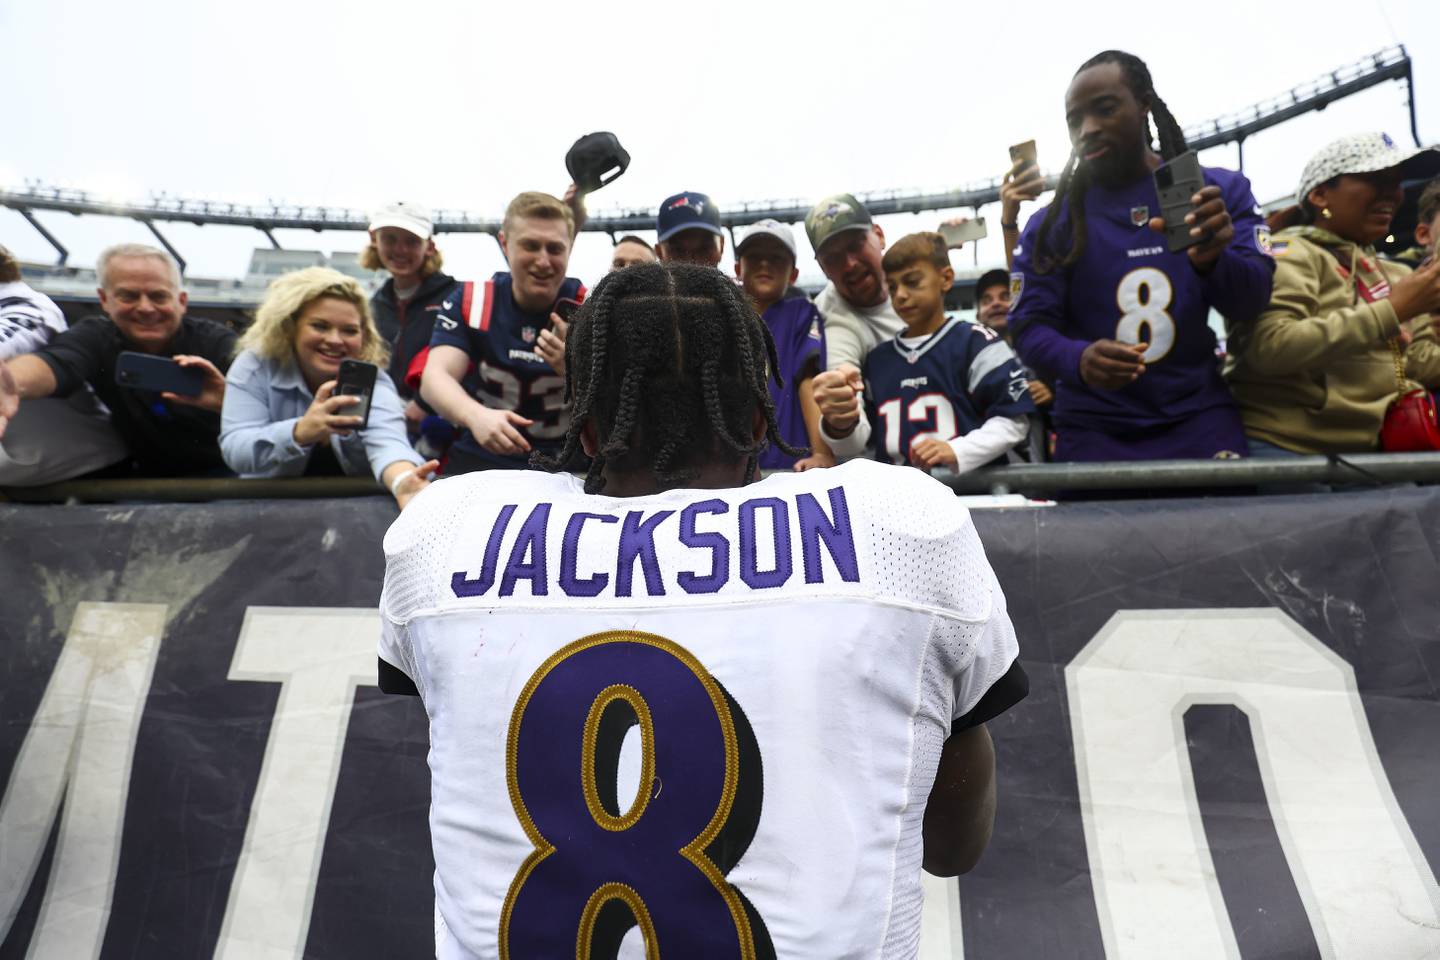 FOXBOROUGH, MASSACHUSETTS - SEPTEMBER 25: Quarterback Lamar Jackson #8 of the Baltimore Ravens celebrates with fans after his team's 37-26 win over the New England Patriots at Gillette Stadium on September 25, 2022 in Foxborough, Massachusetts.